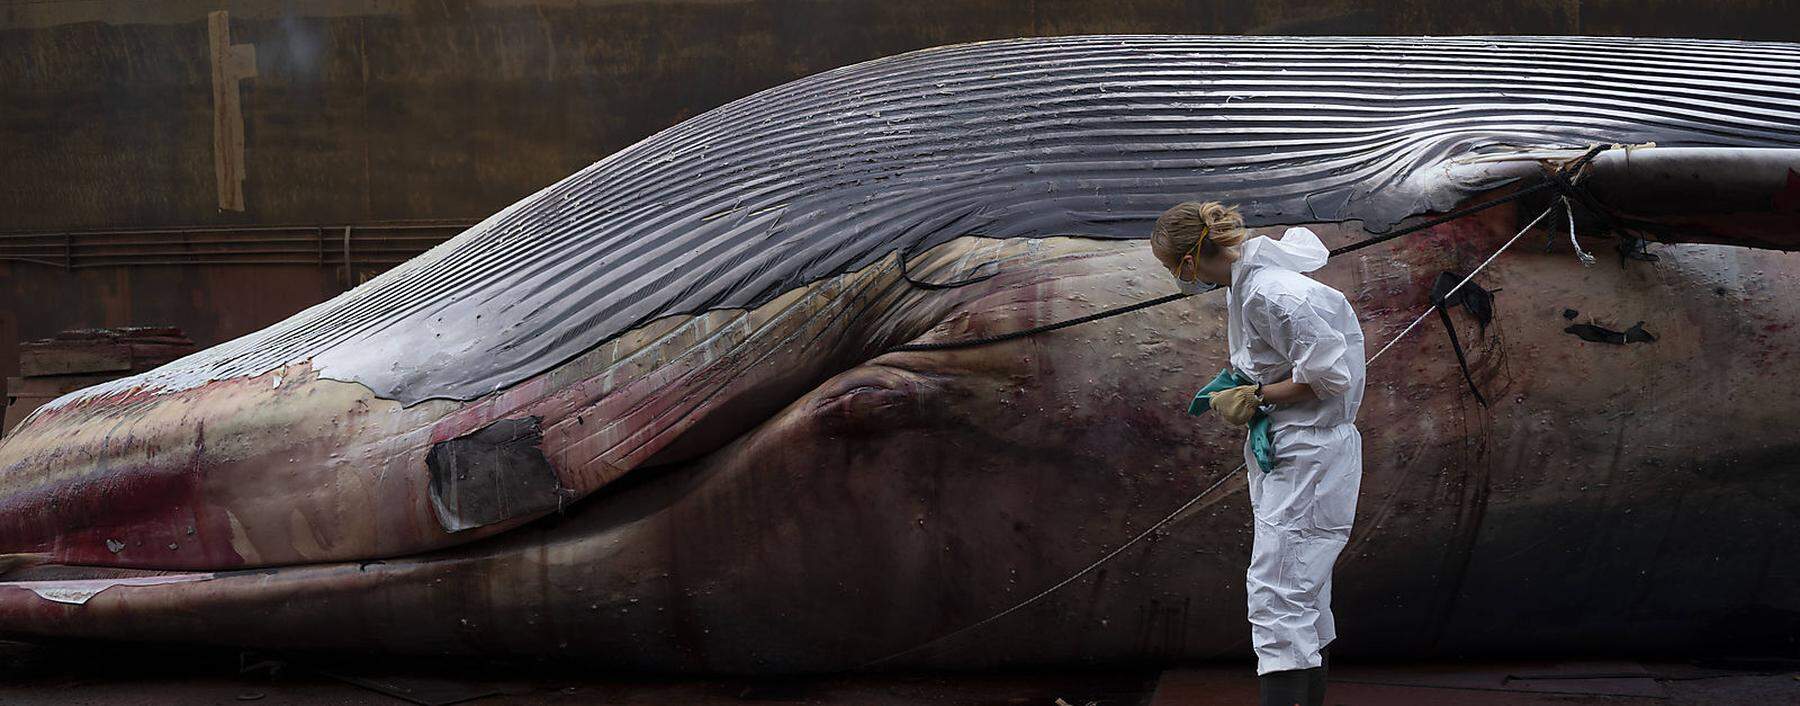 News Bilder des Tages Dissected dead Whale in Naples The first dissections on the carcass of the whale found dead last T